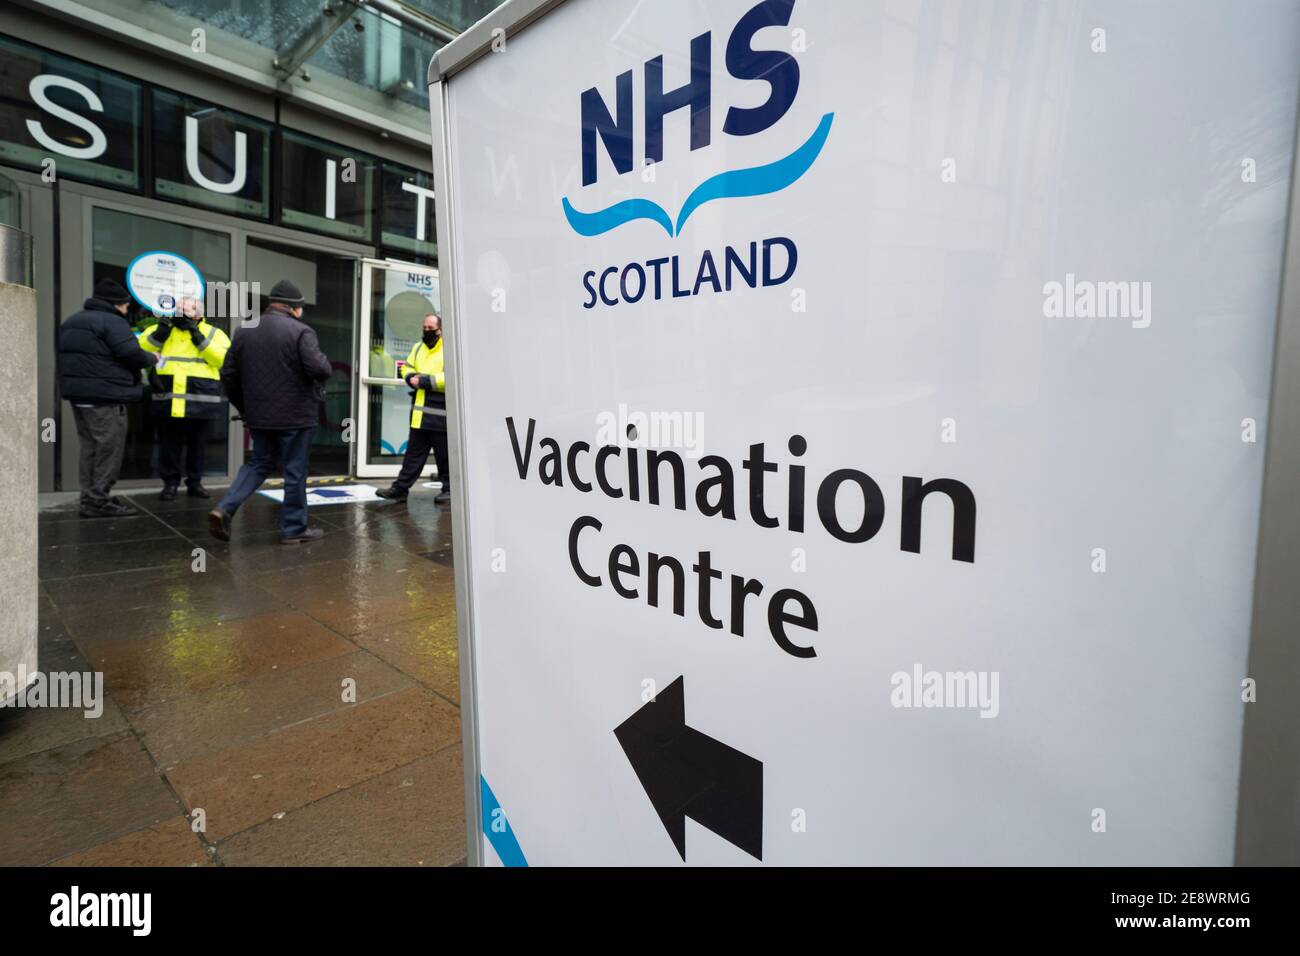 Edinburgh, Scotland, UK. 1 February 2021. Mass Covid-19 vaccination centre opens today at EICC ( Edinburgh International Conference Centre ) in Edinburgh. Members of the public with appointments arrive for their vaccinations. Iain Masterton/Alamy Live News Stock Photo